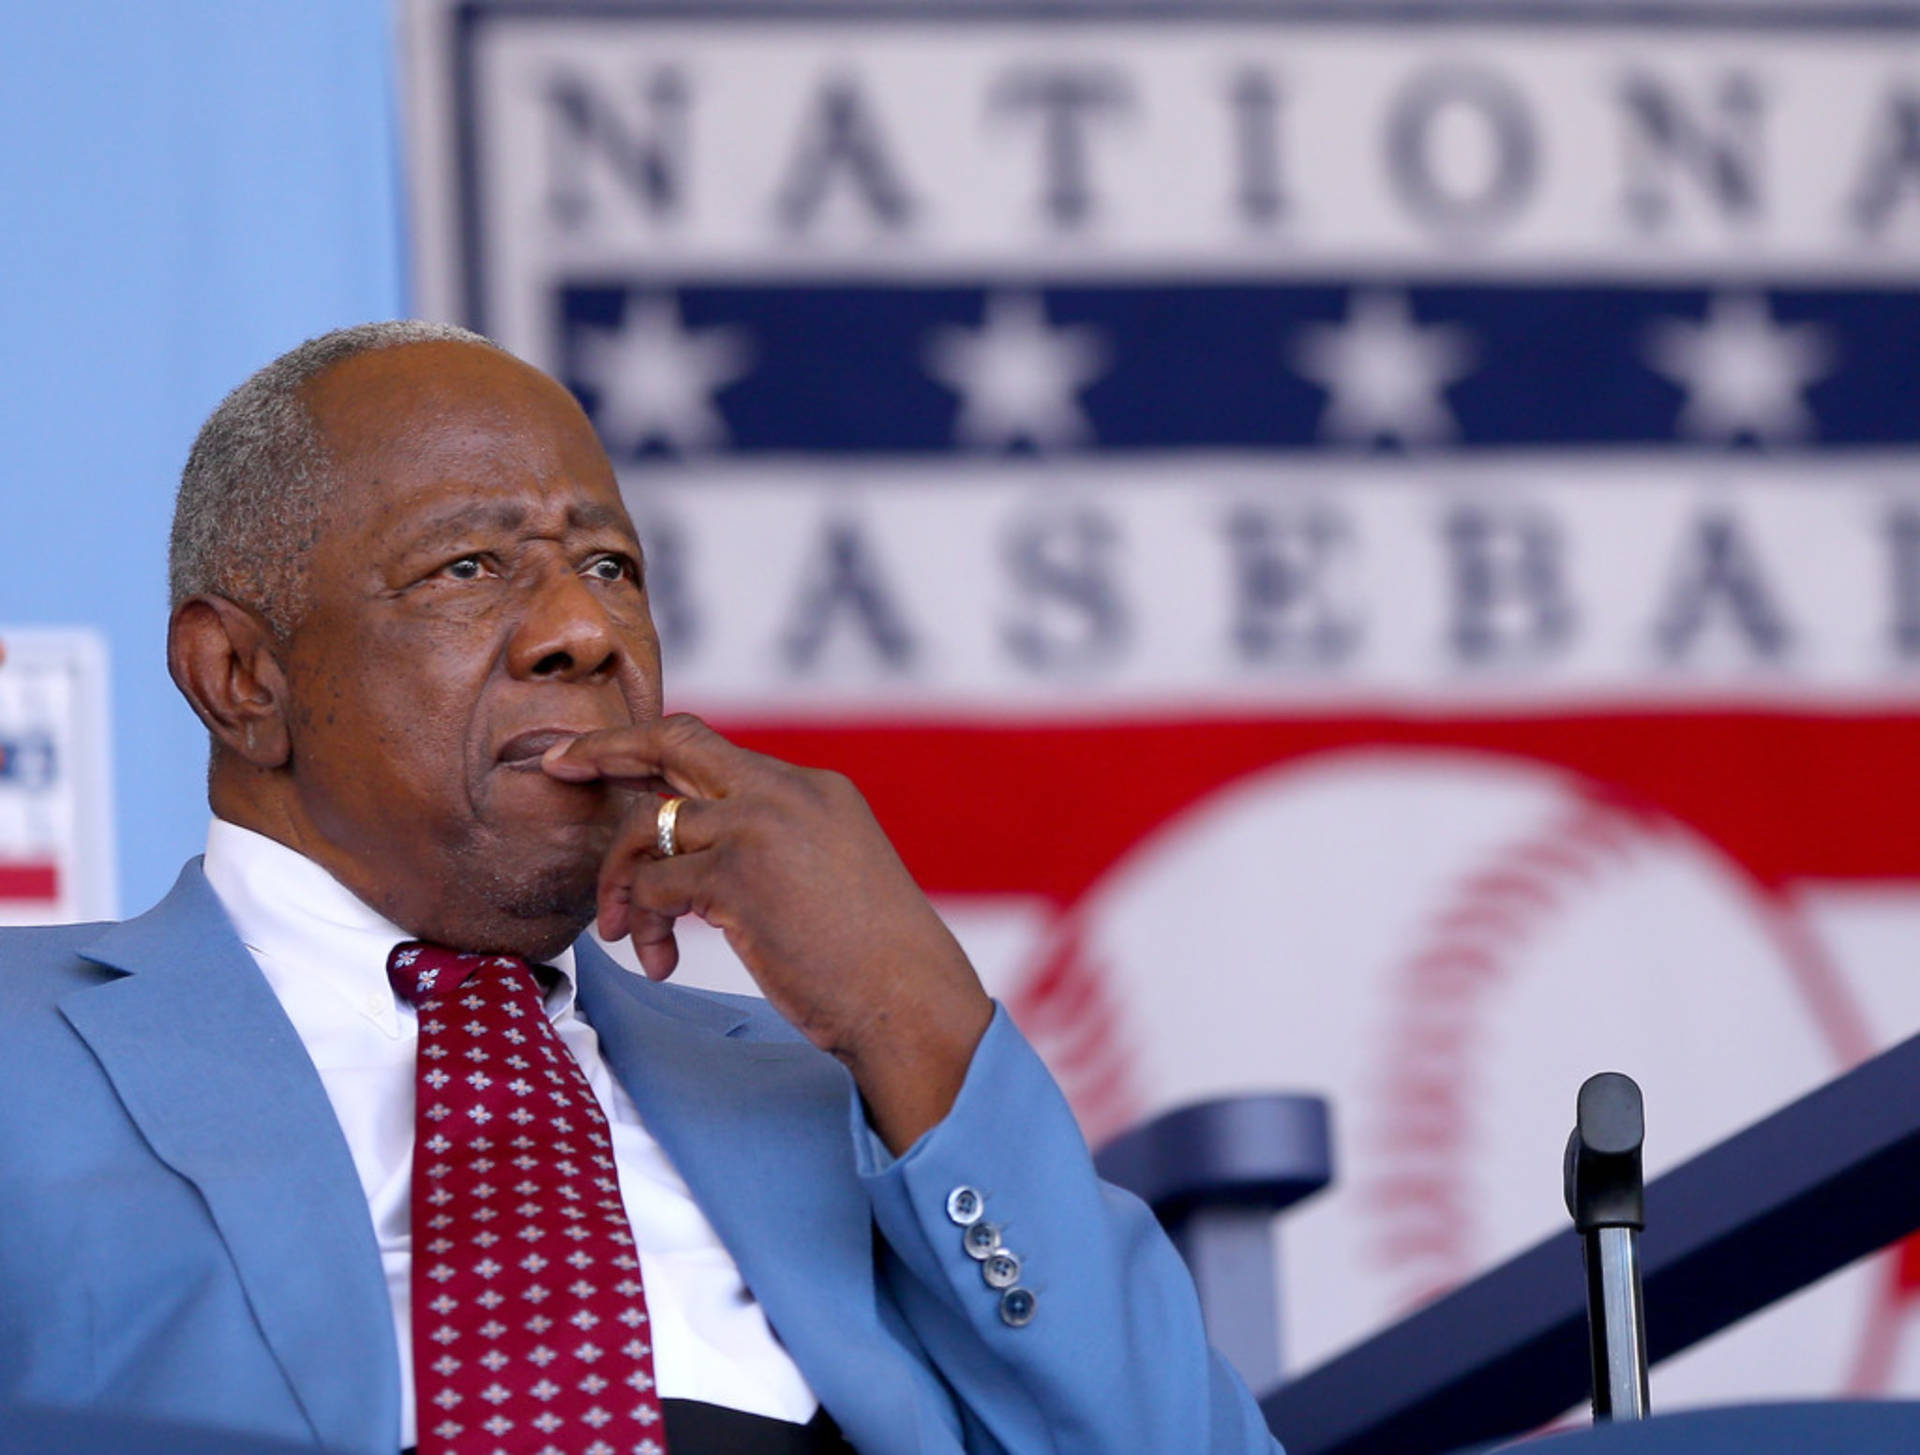 Hank Aaron Hall Of Fame Induction